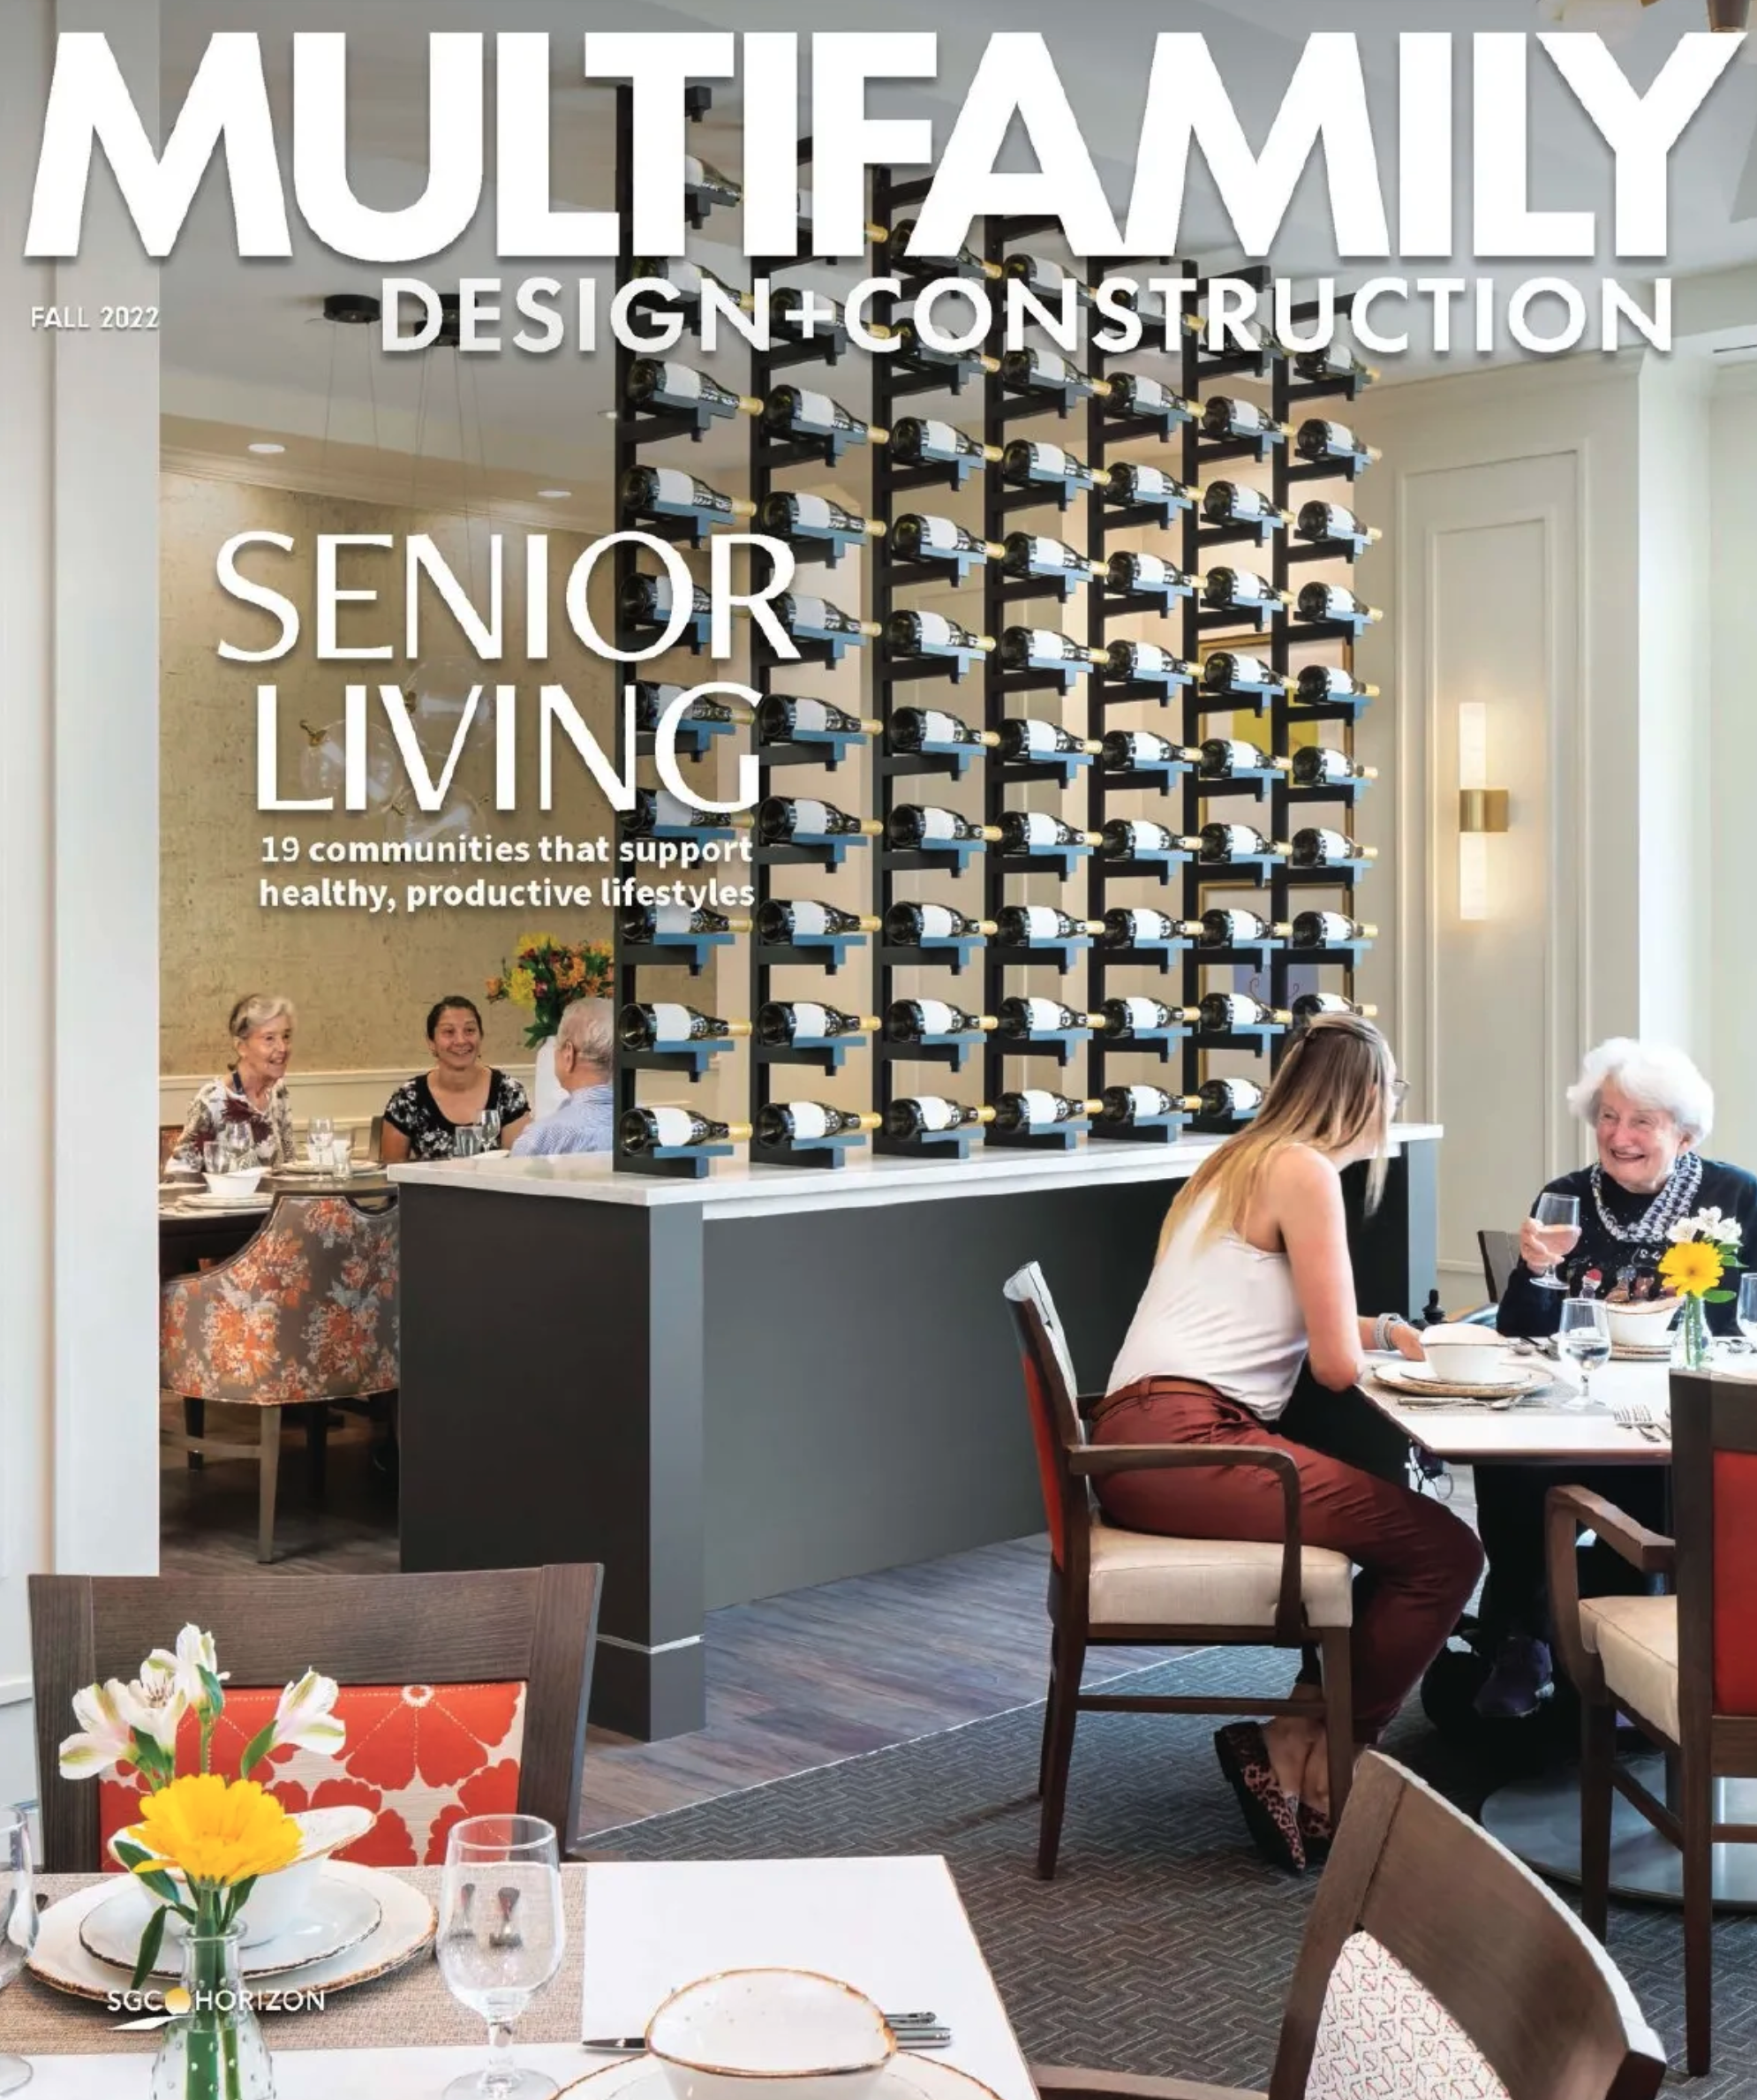 Multifamily Design and Construction magazine Fall 2022 issue